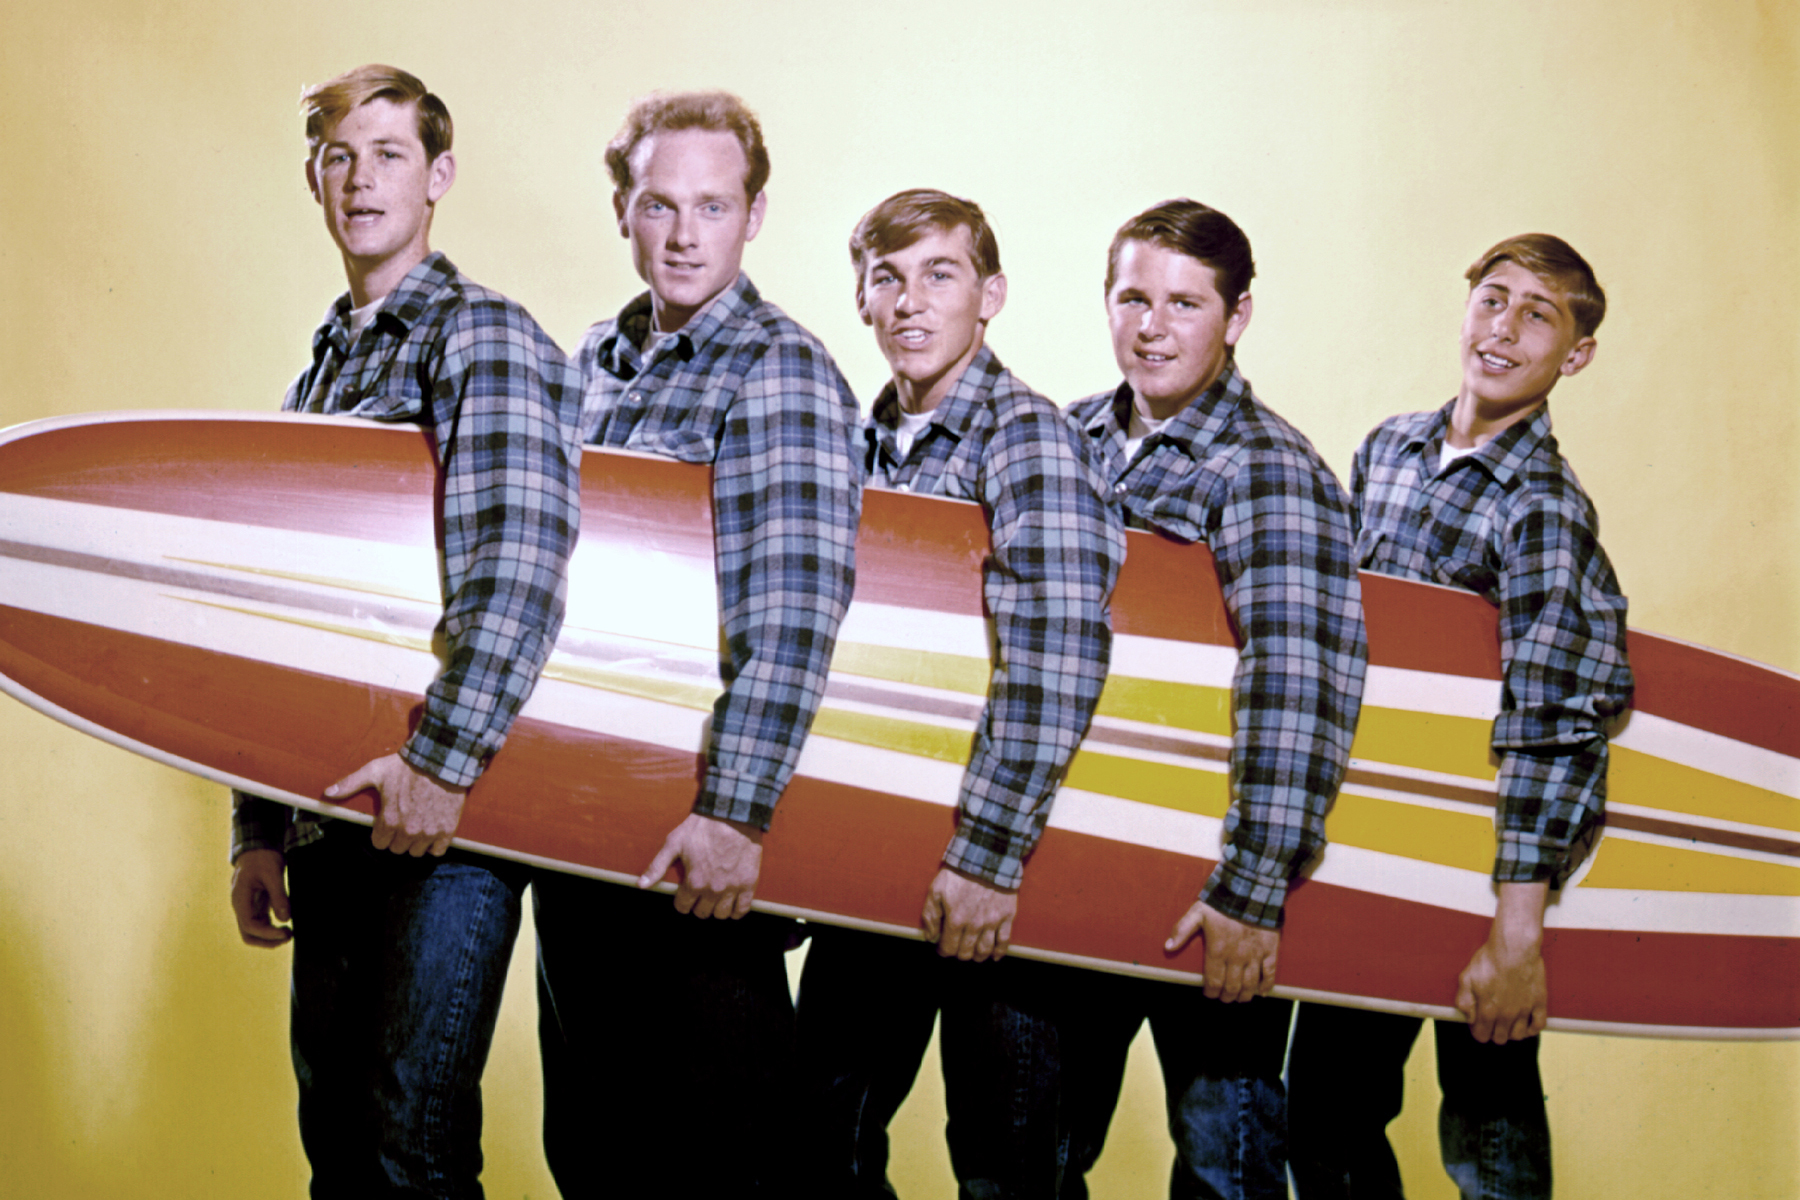 ZOOM The History of the Beach Boys Grayslake Area Public Library